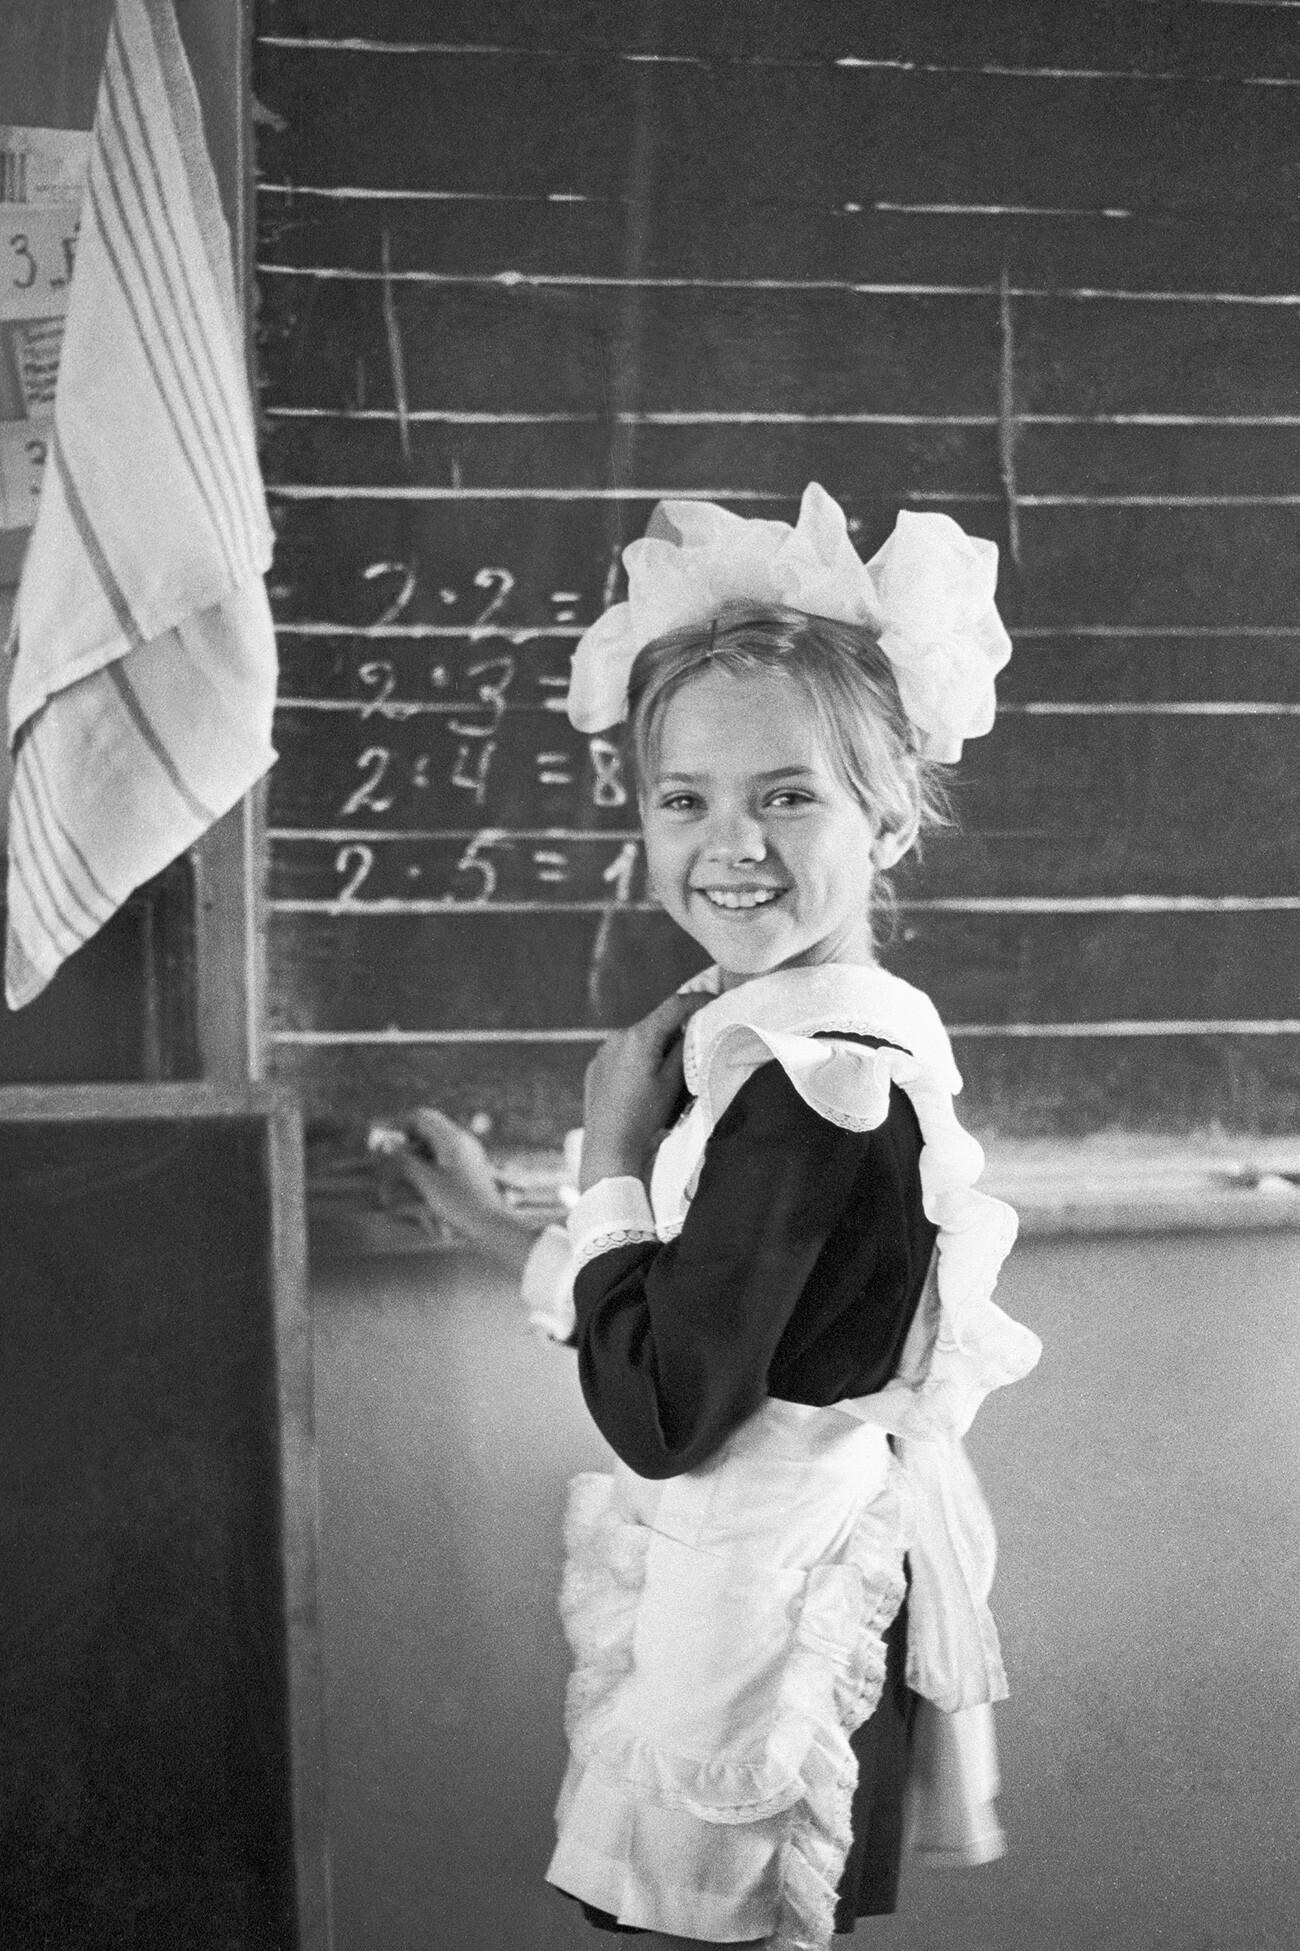 A first-grader from the Rostov Region.